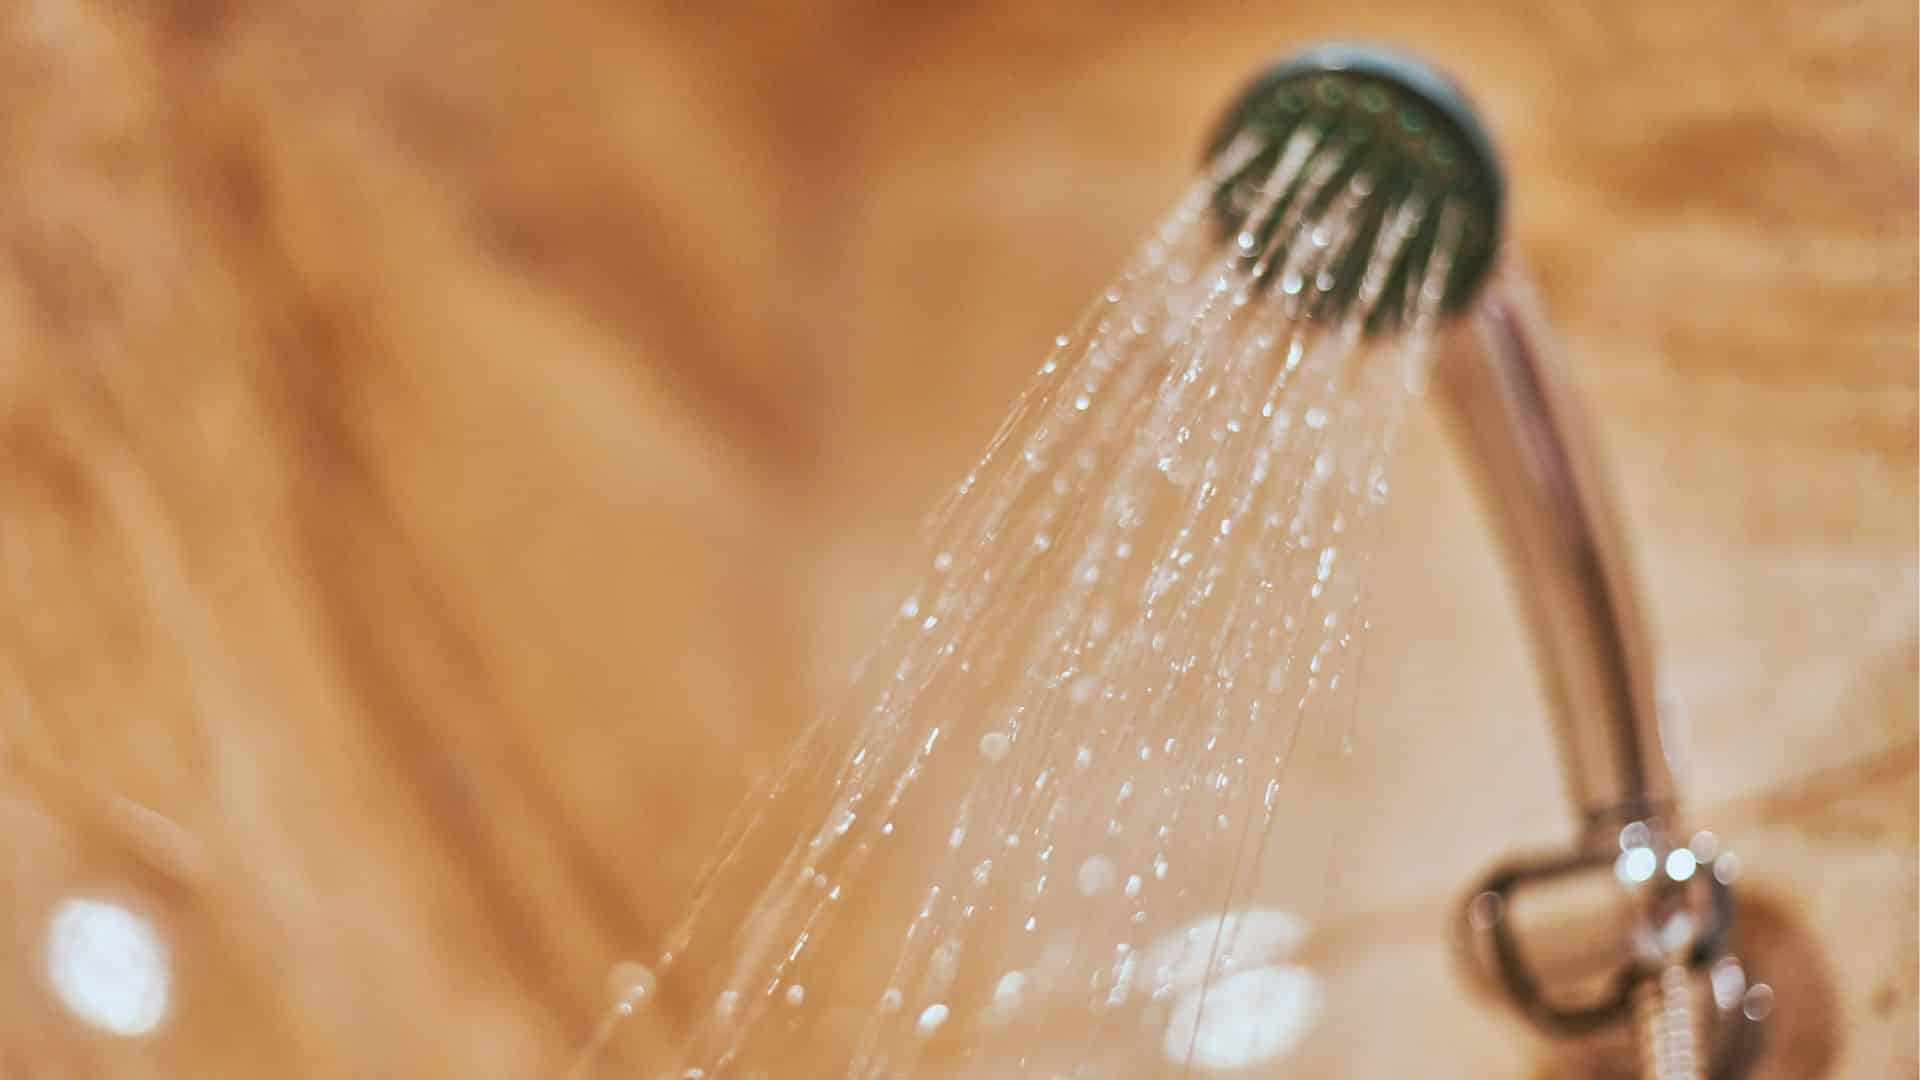 Shower head with water spraying